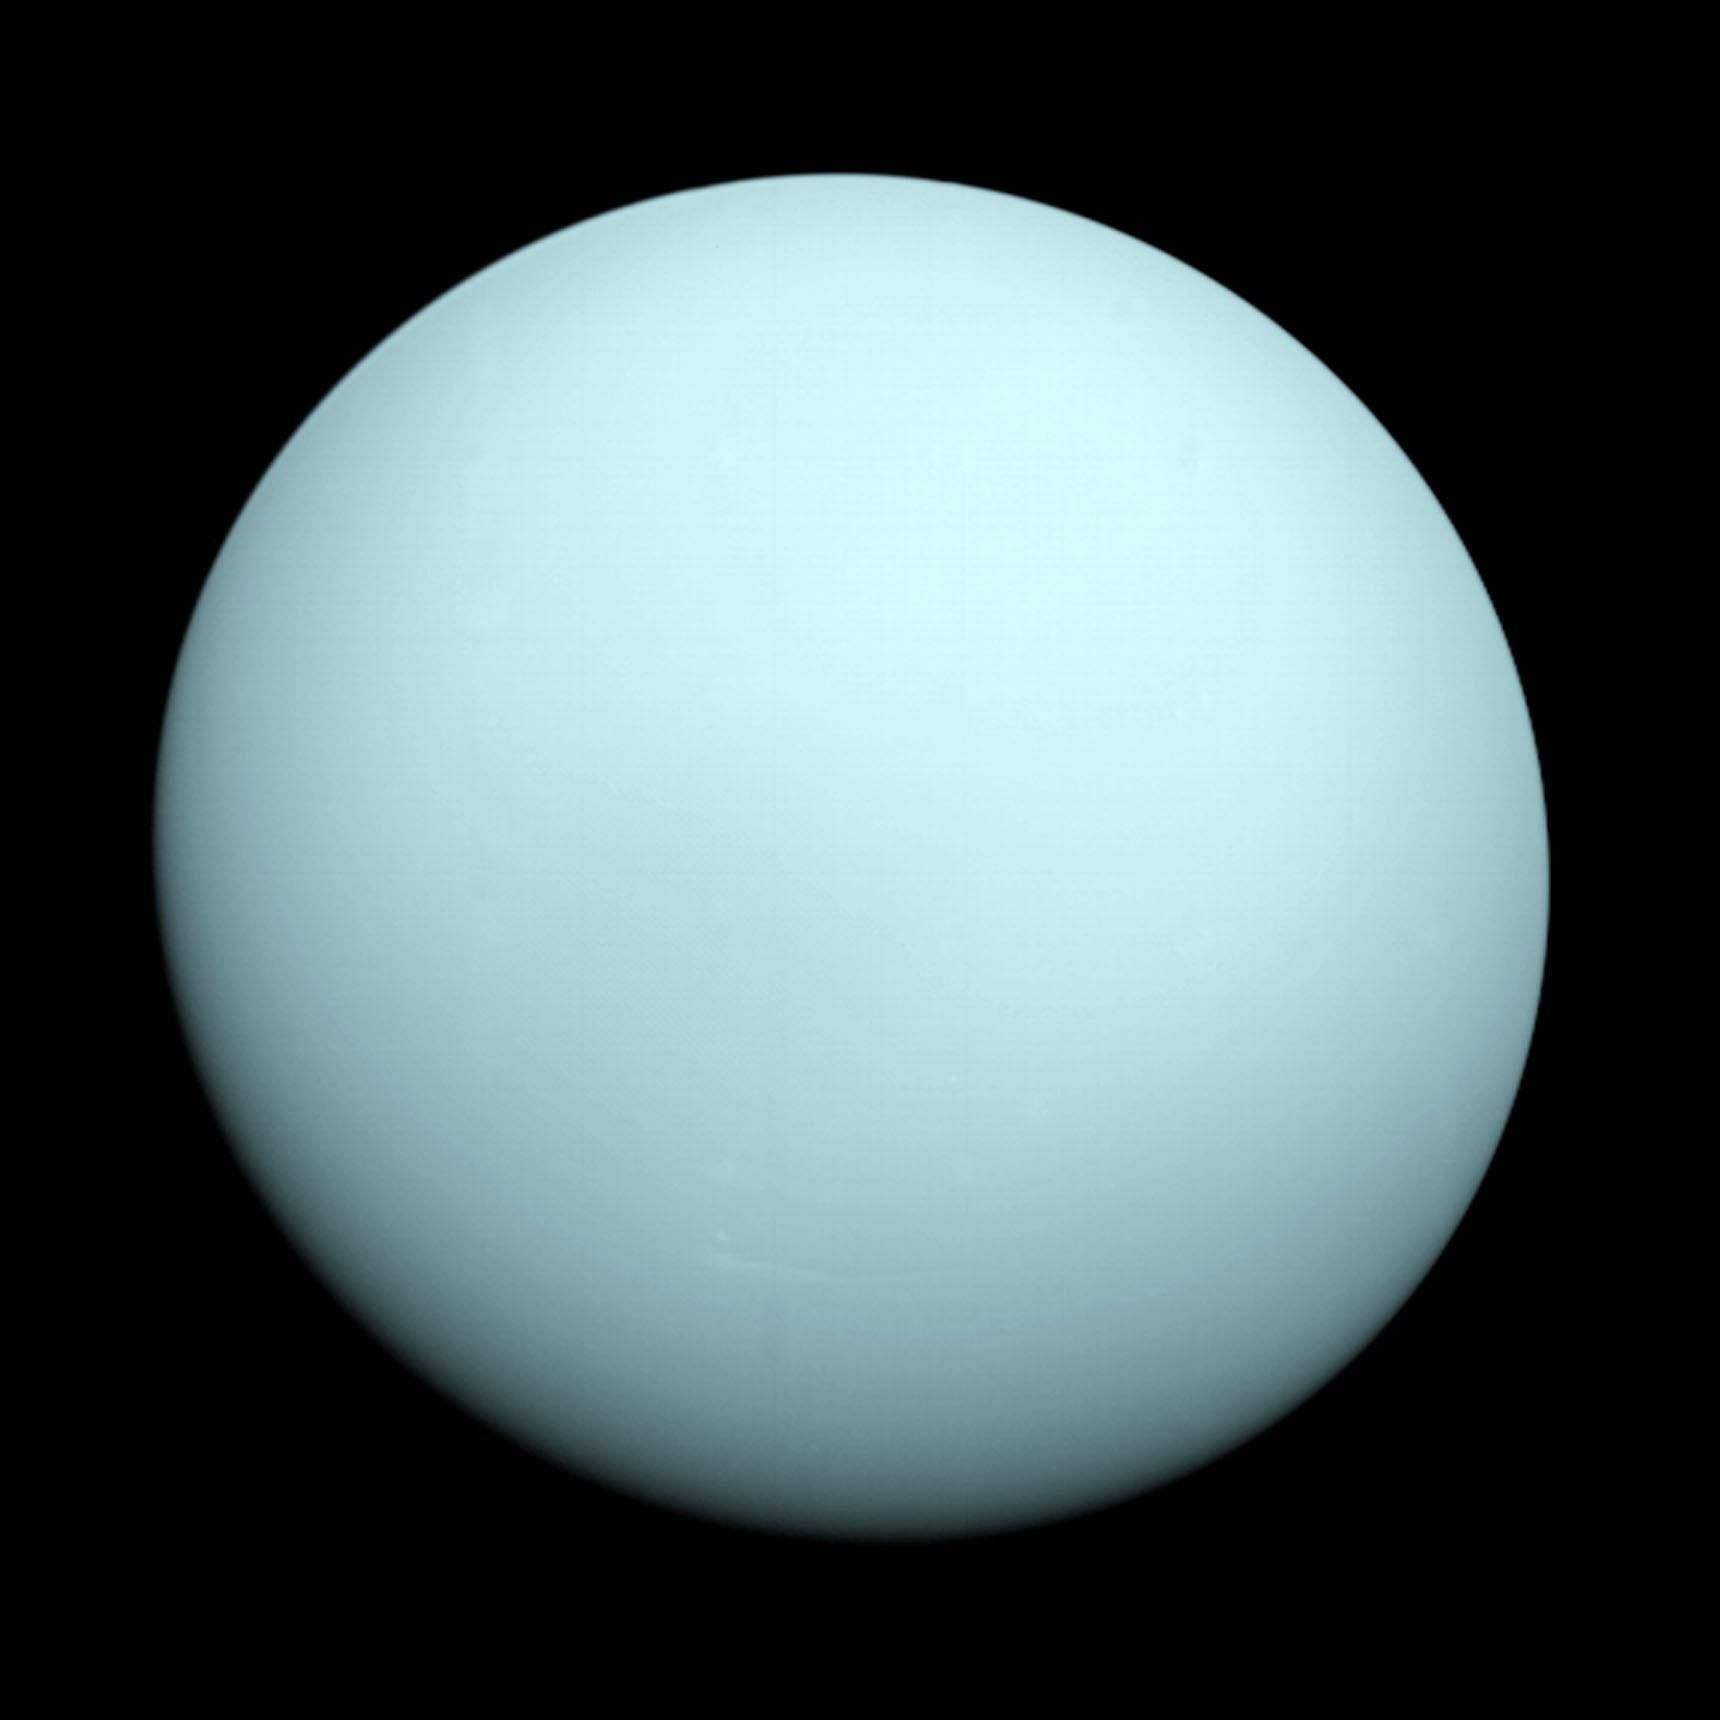 Why Uranus Is a Different Shade of Blue Than Neptune